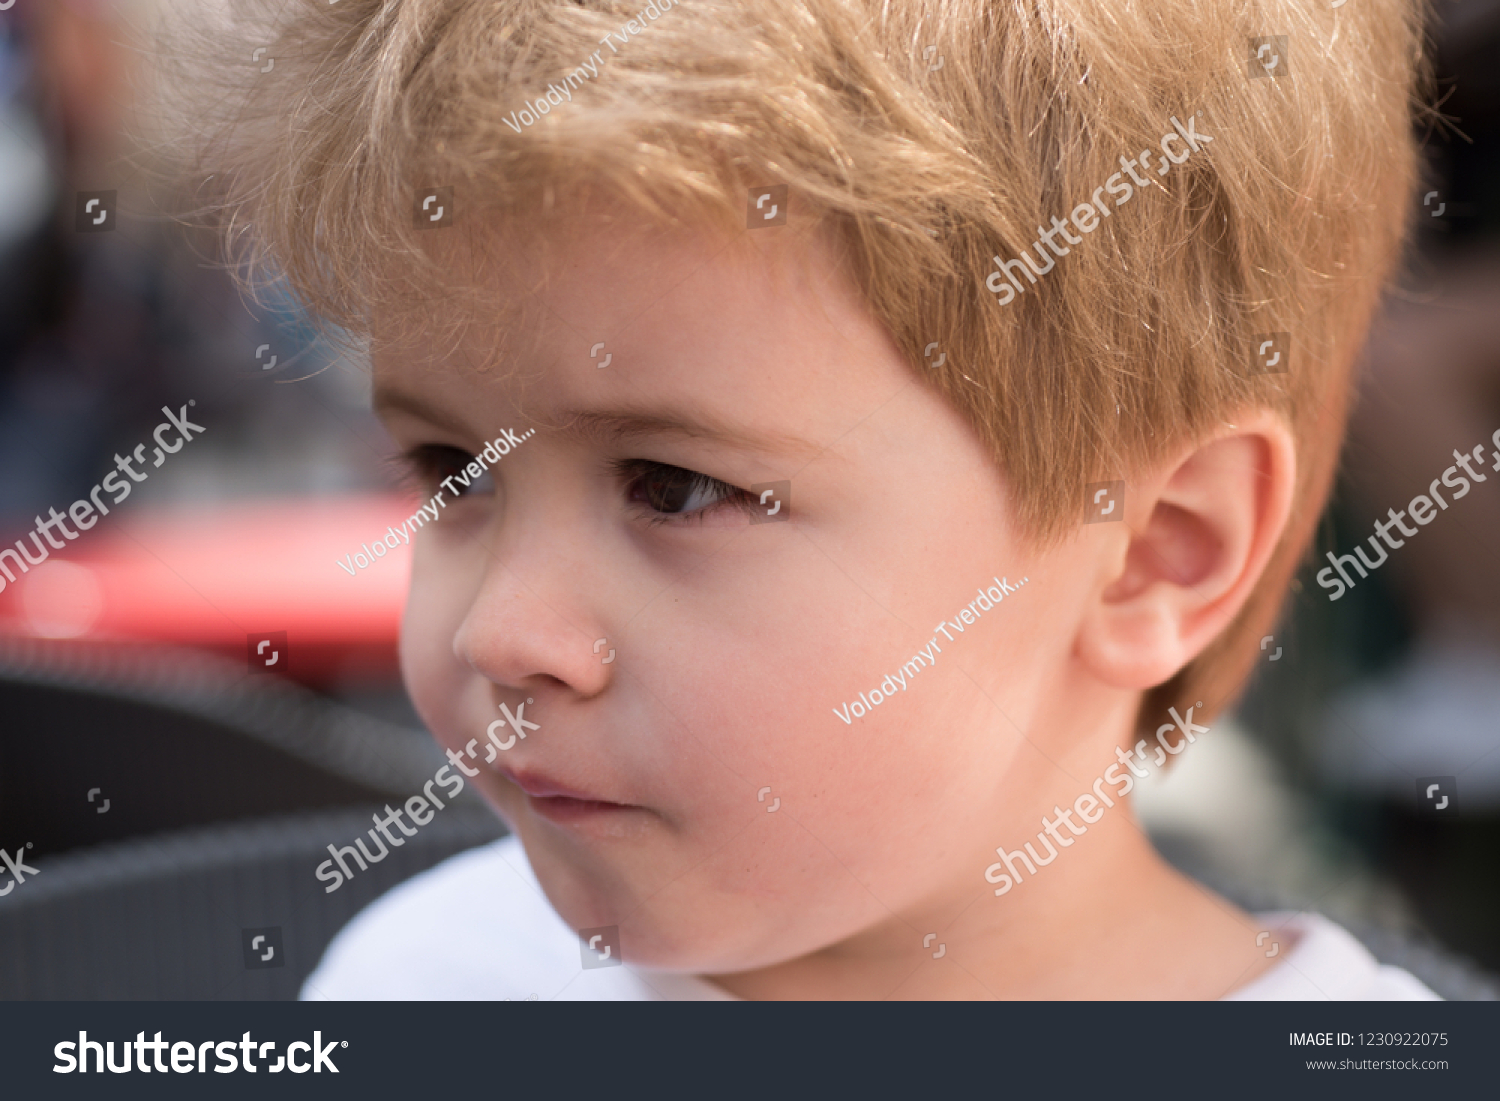 Caring Hair Little Child Stylish Haircut Stock Photo Edit Now